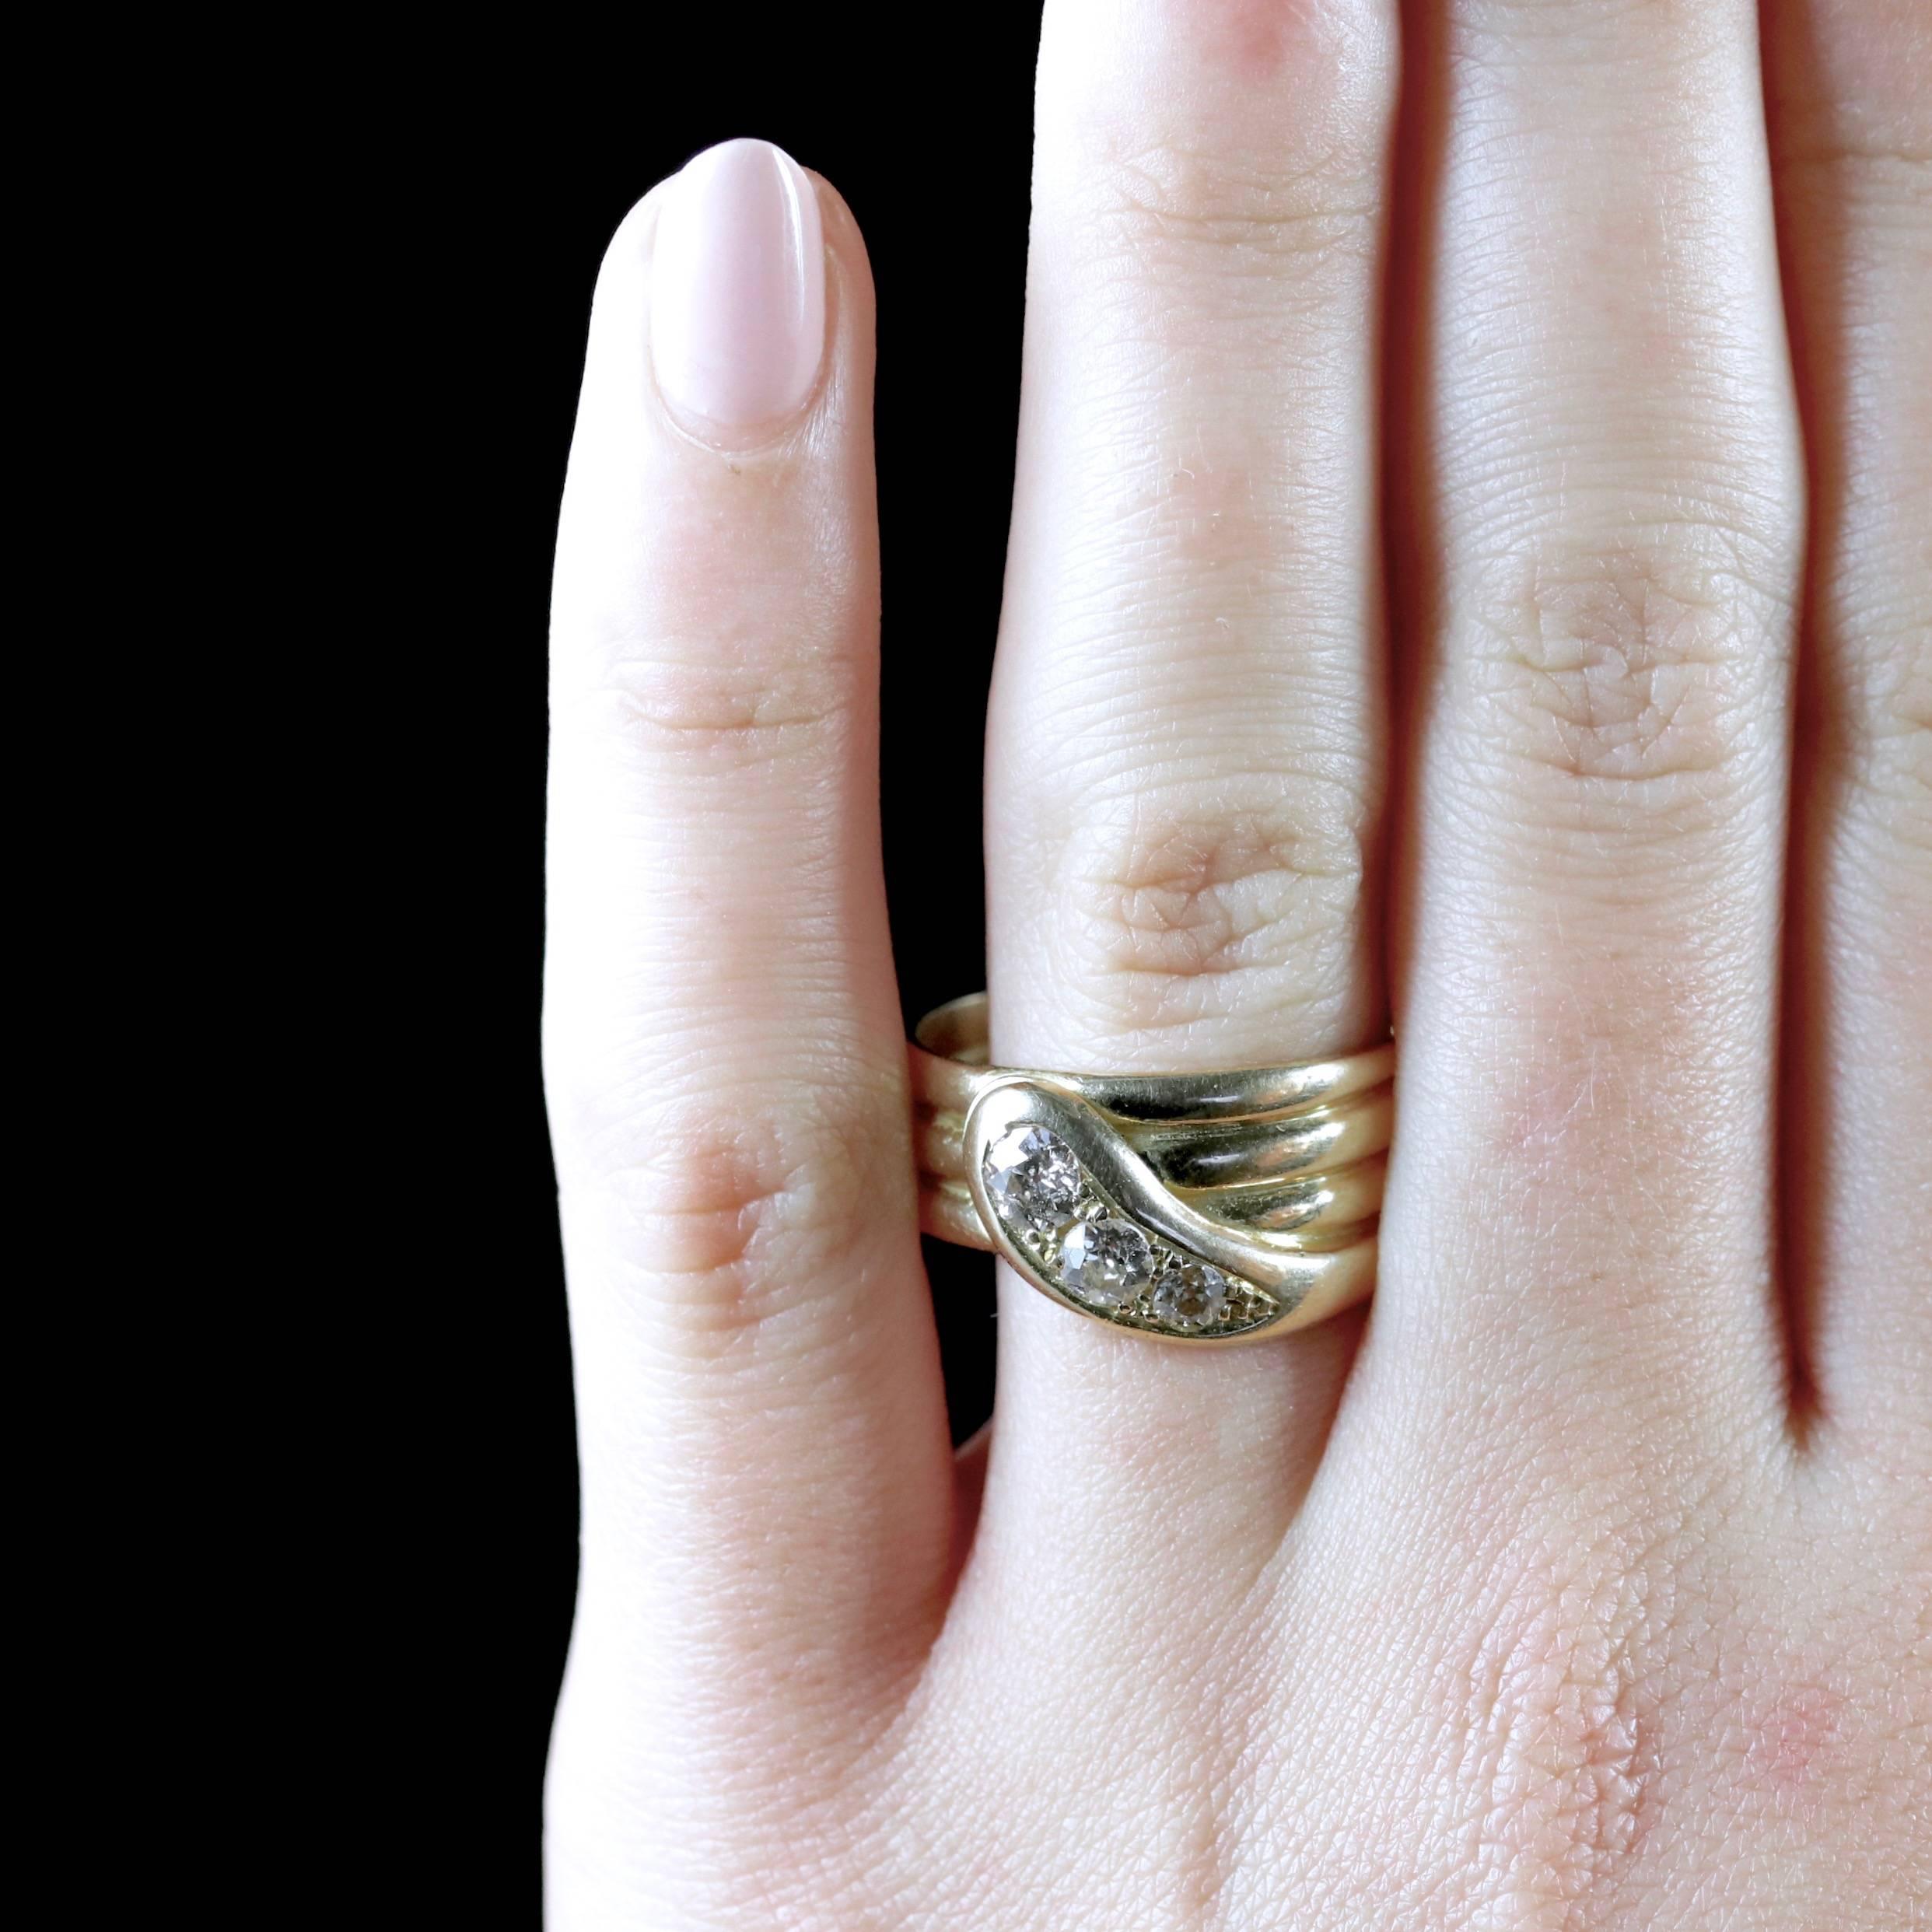 Women's Antique Edwardian 18 Carat Gold Diamond Serpent Ring Dated 1914 For Sale